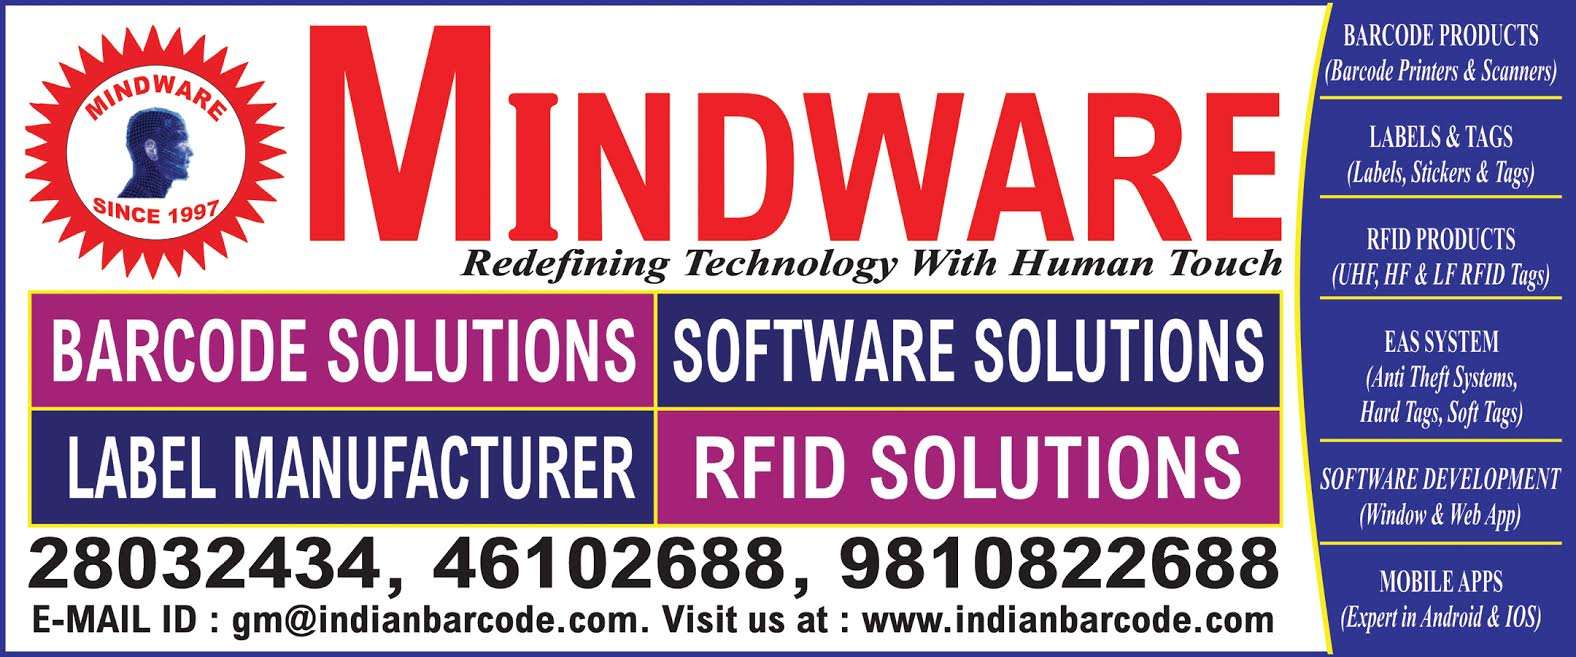 Indian Barcode Corporation (a Mindware Group Company)